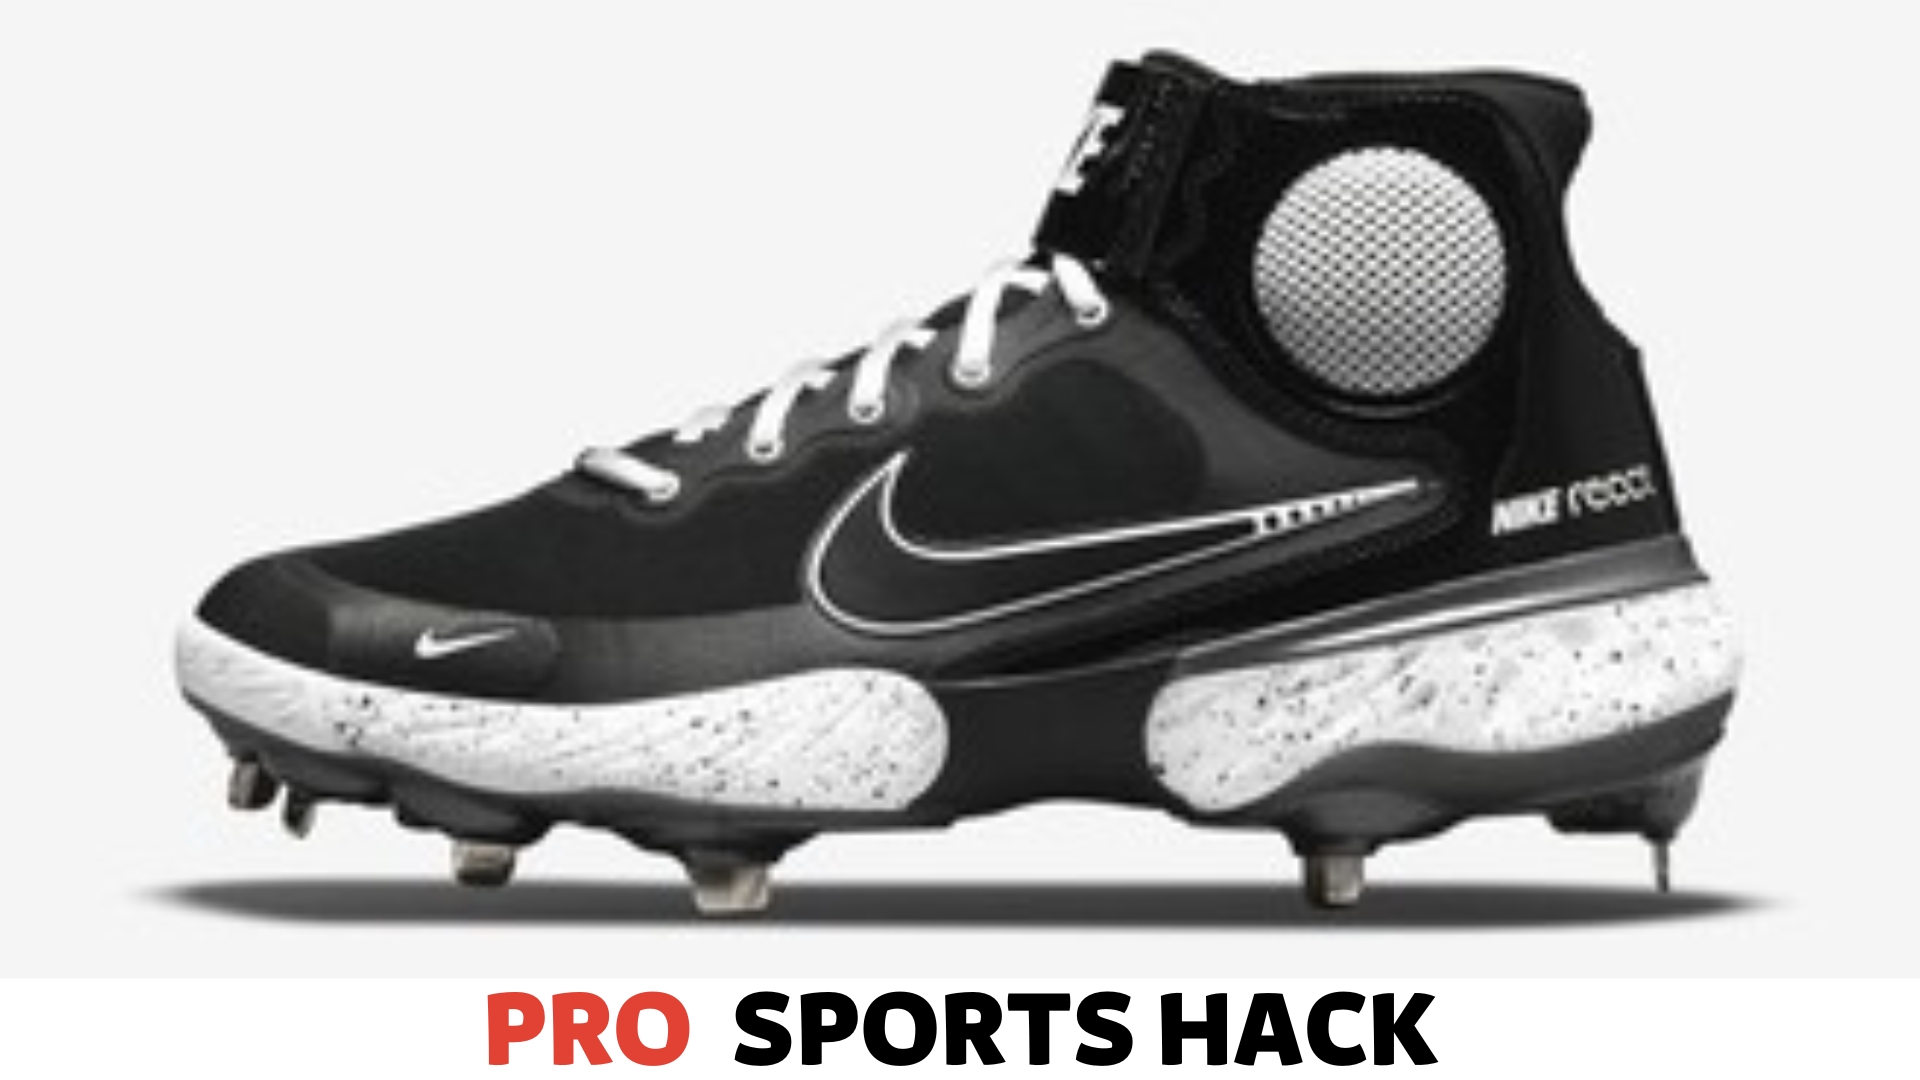 Can Youth Wear Baseball Cleats for Football